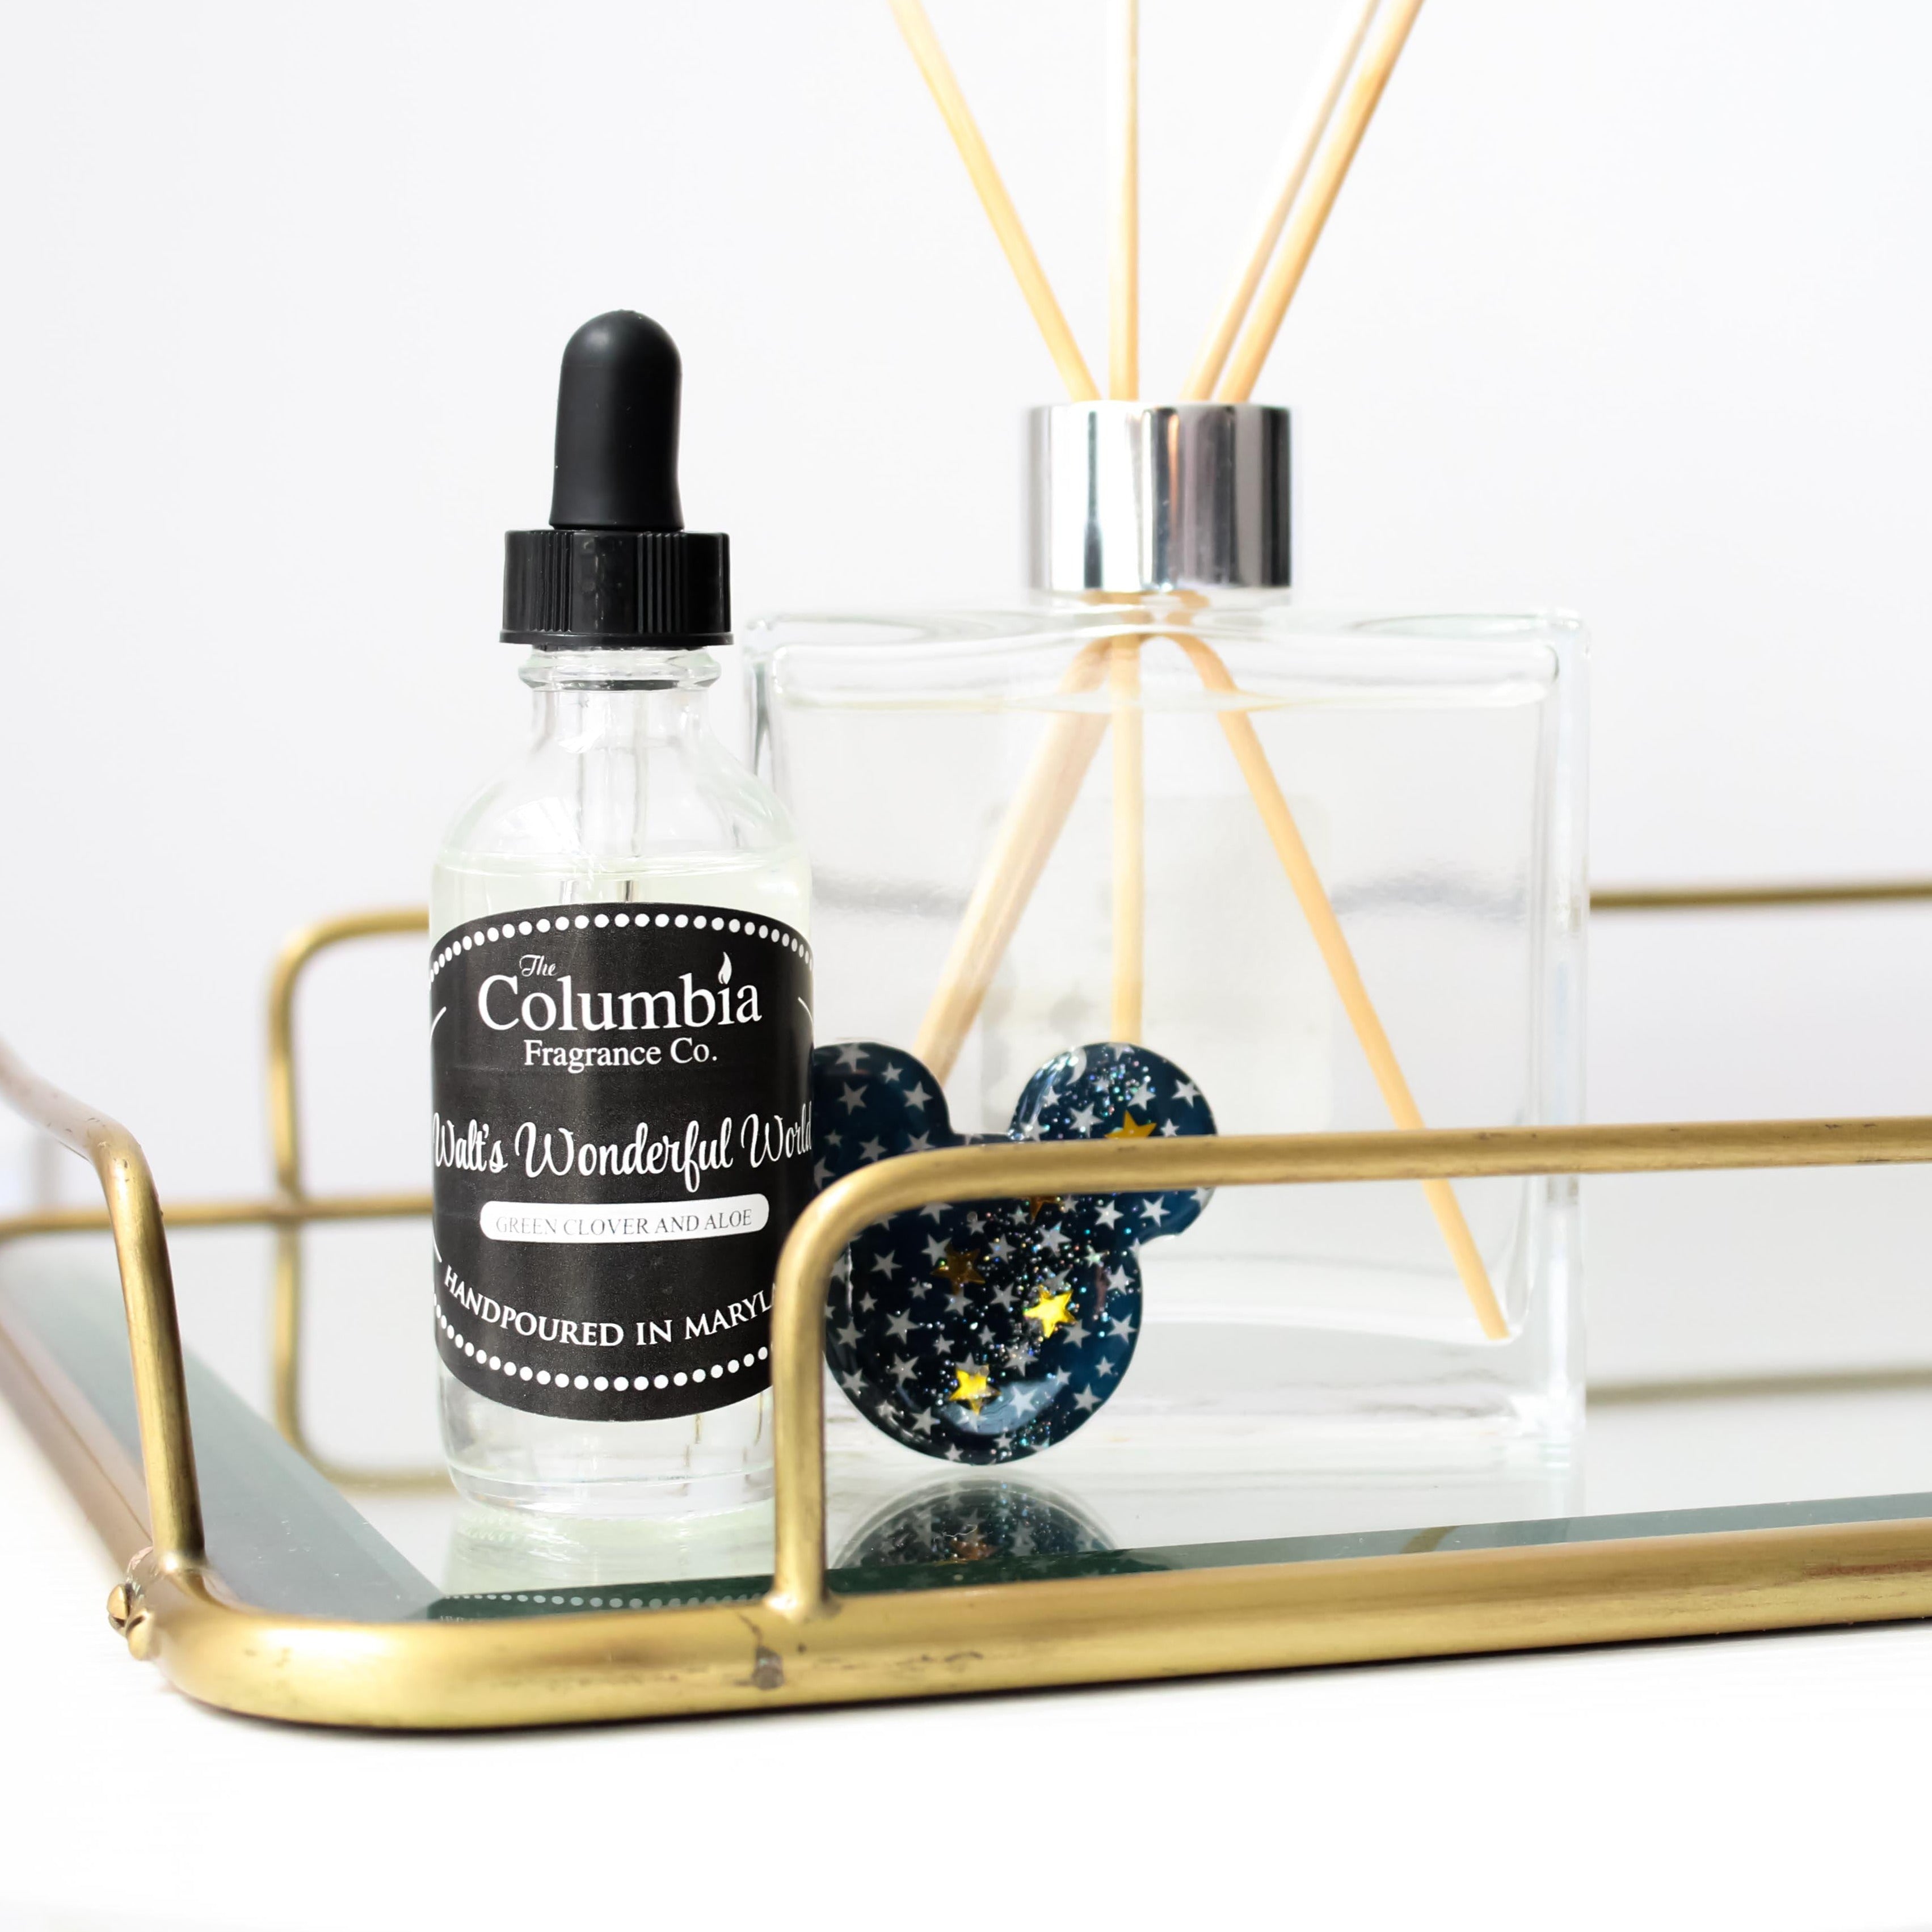 Hotel scent reed diffuser oil – The Columbia Fragrance Co.